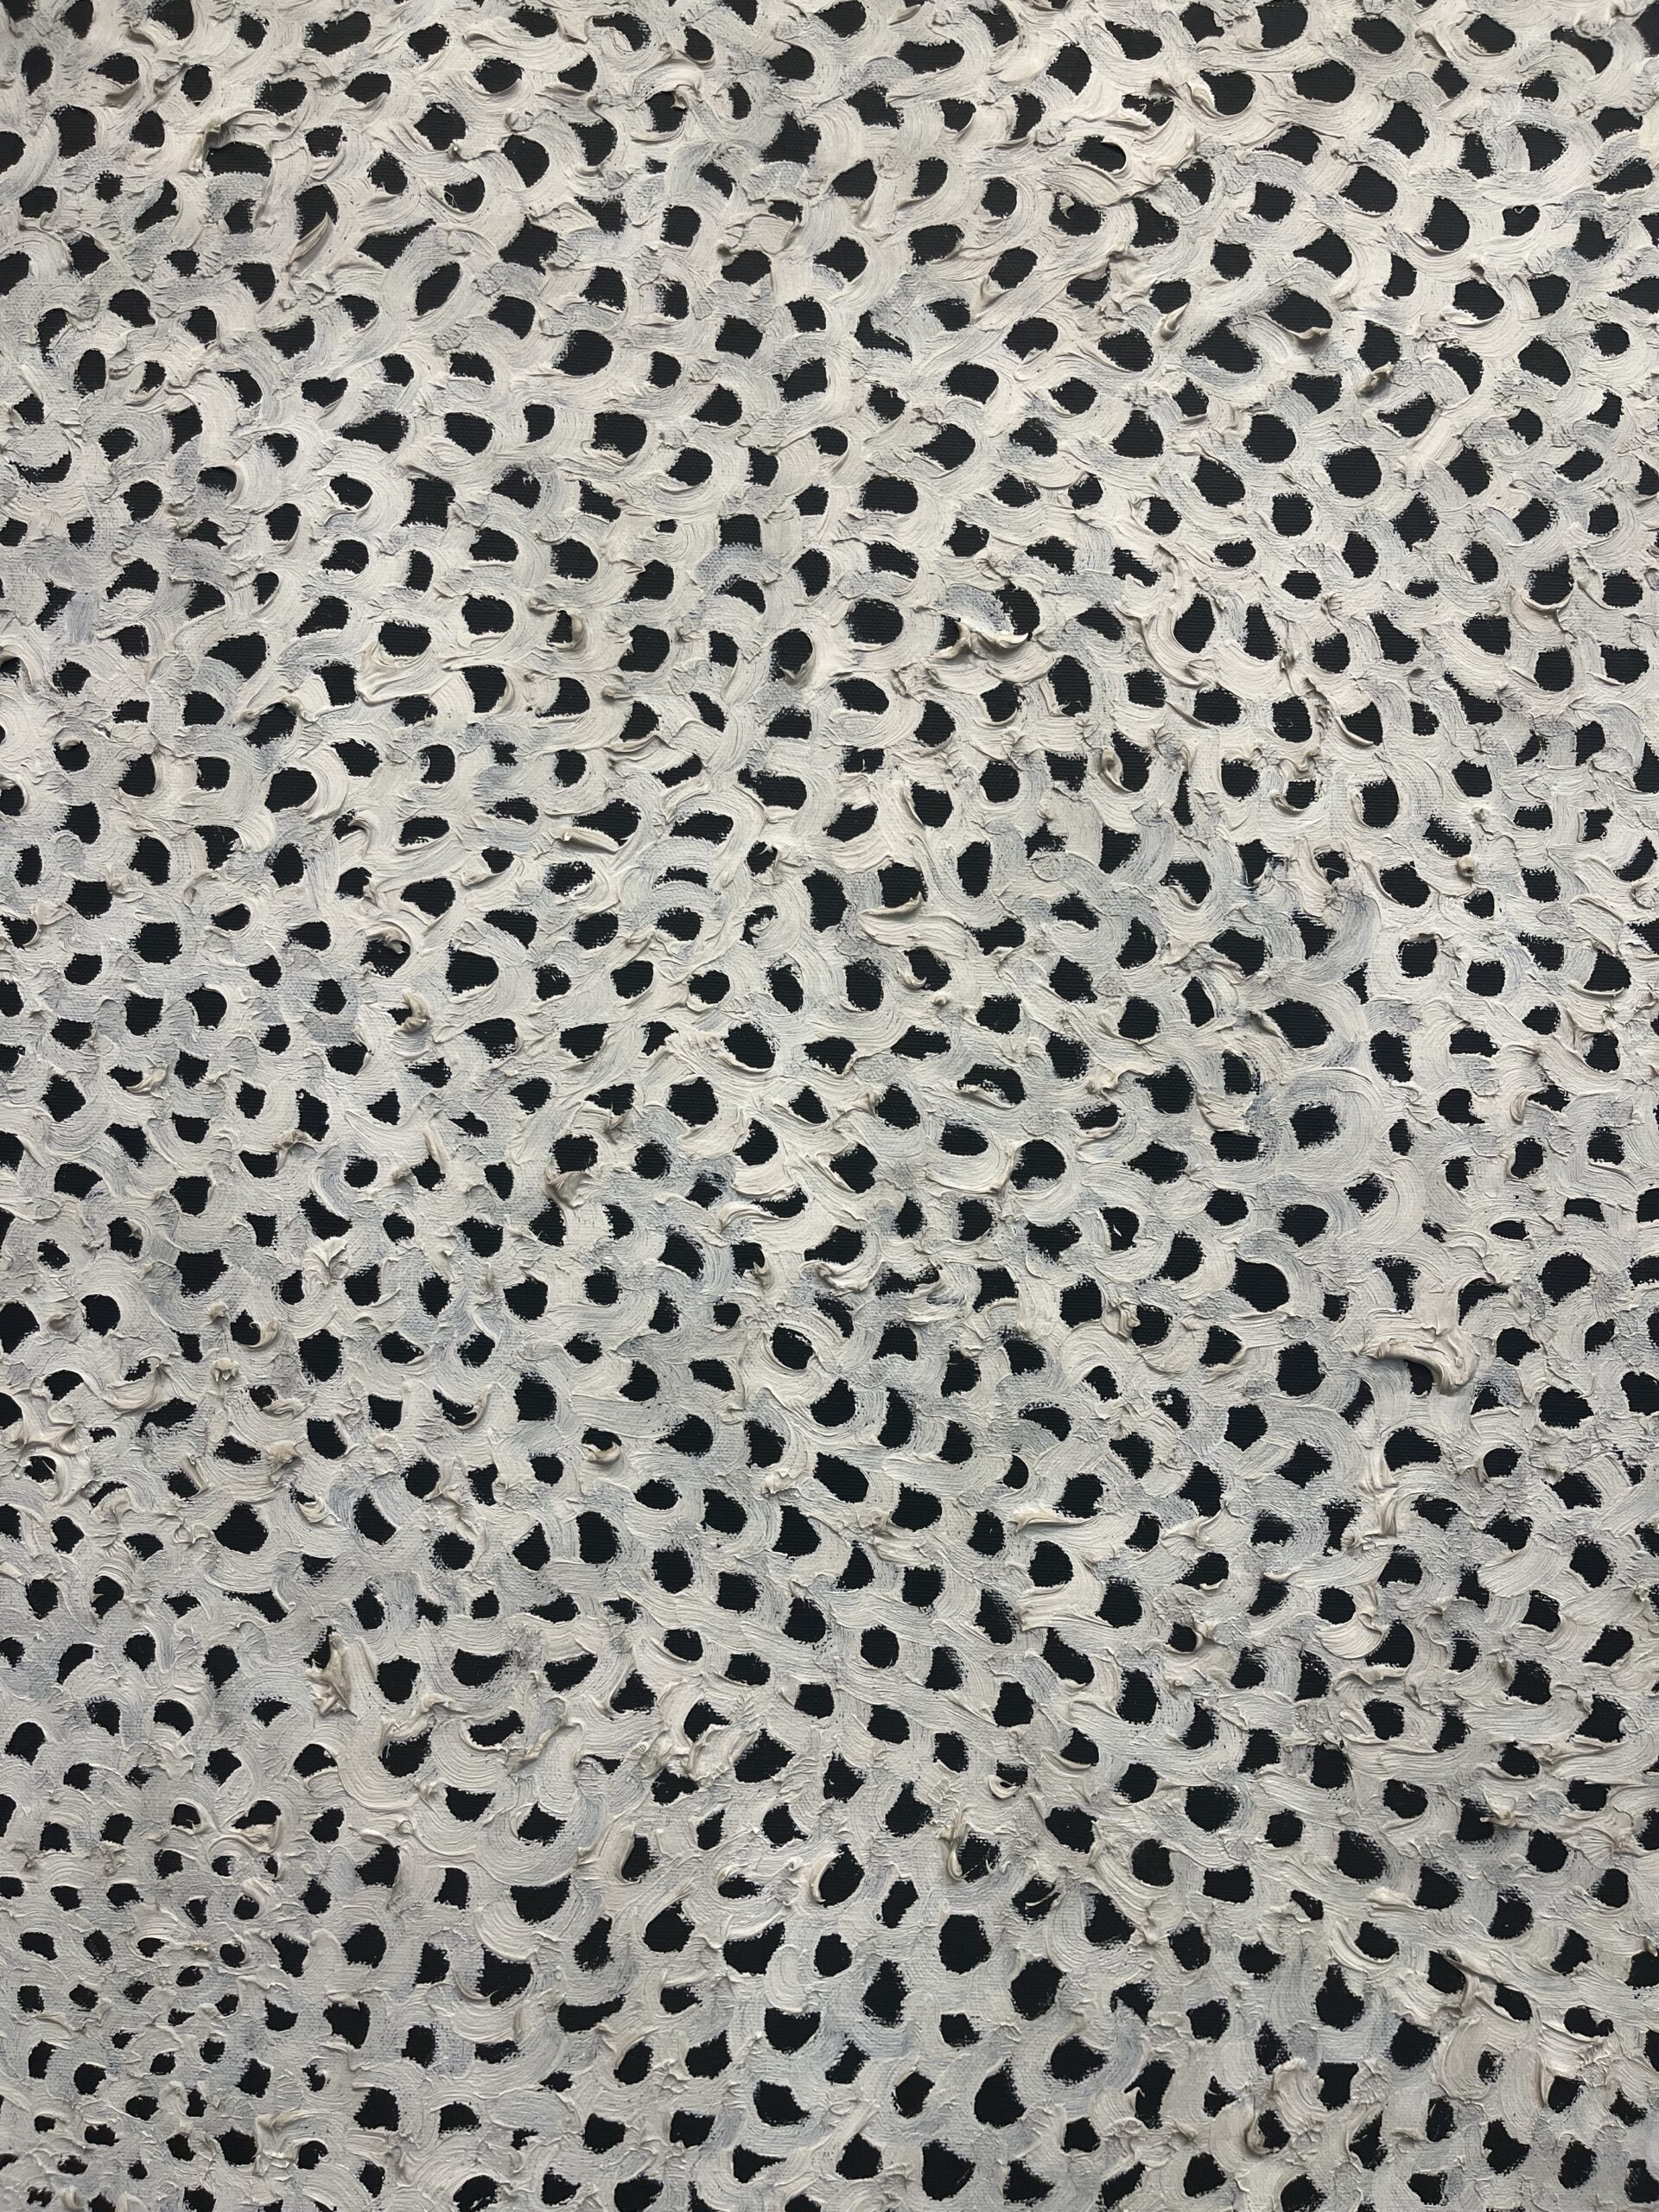 What Is the Meaning of Yayoi Kusama’s Infinity Nets?